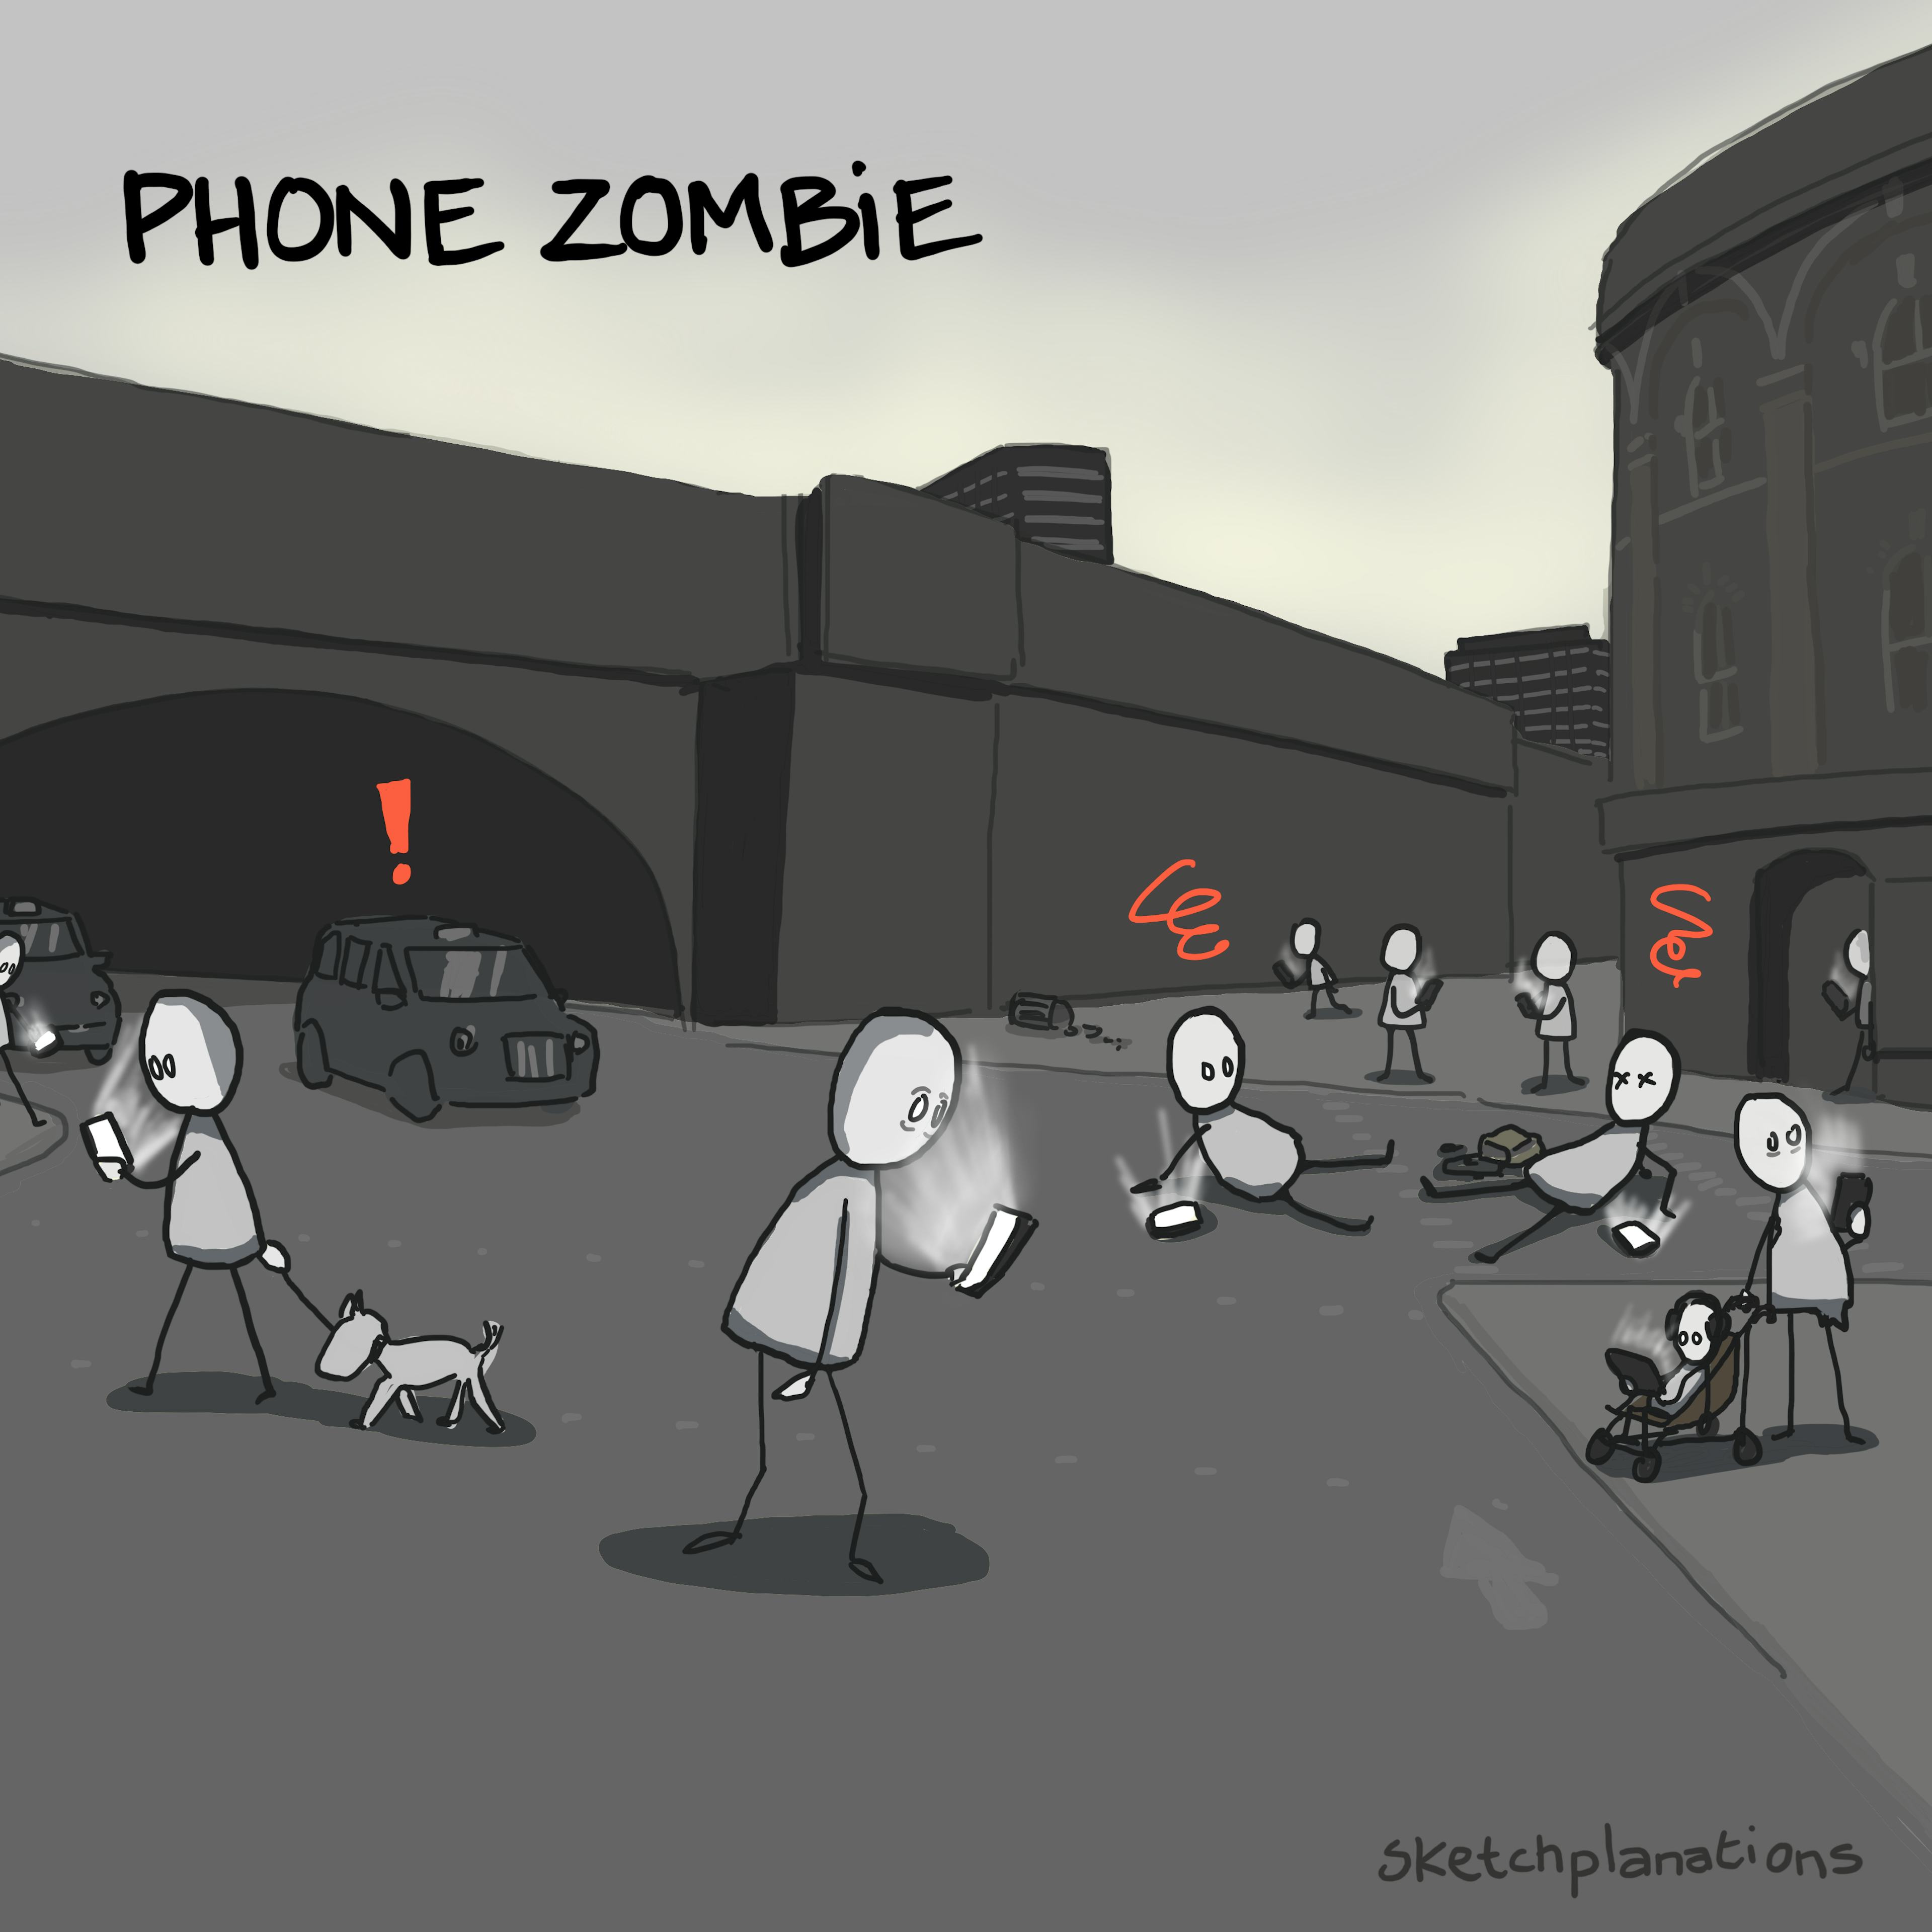 Phone zombie illustration: pedestrians turned zombies staring into their phones run into danger and bump into each other while crossing a road